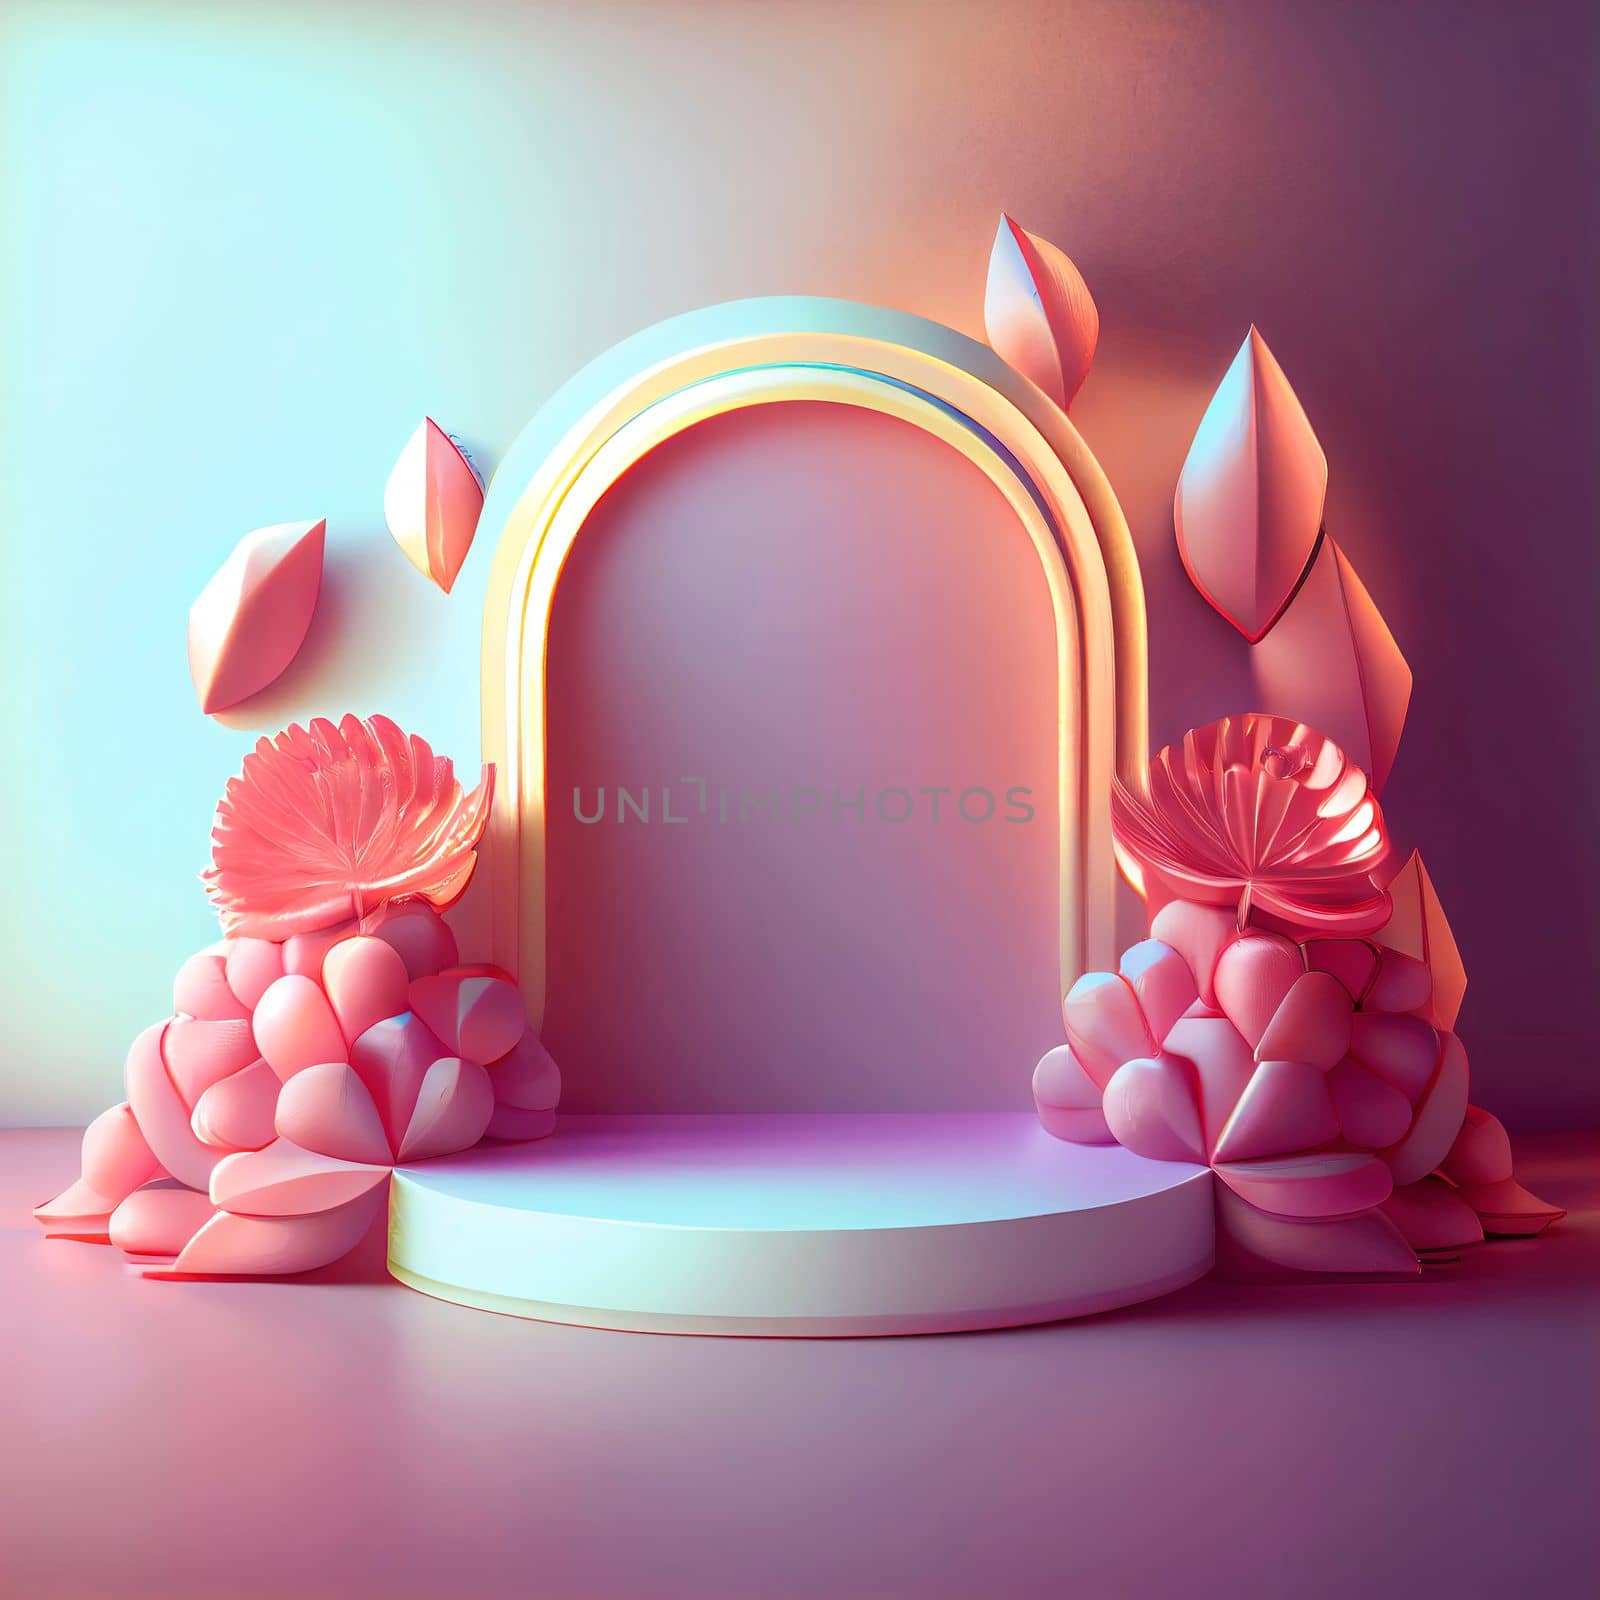 Realistic 3d illustration of podium with floral ornament for product banner by templator